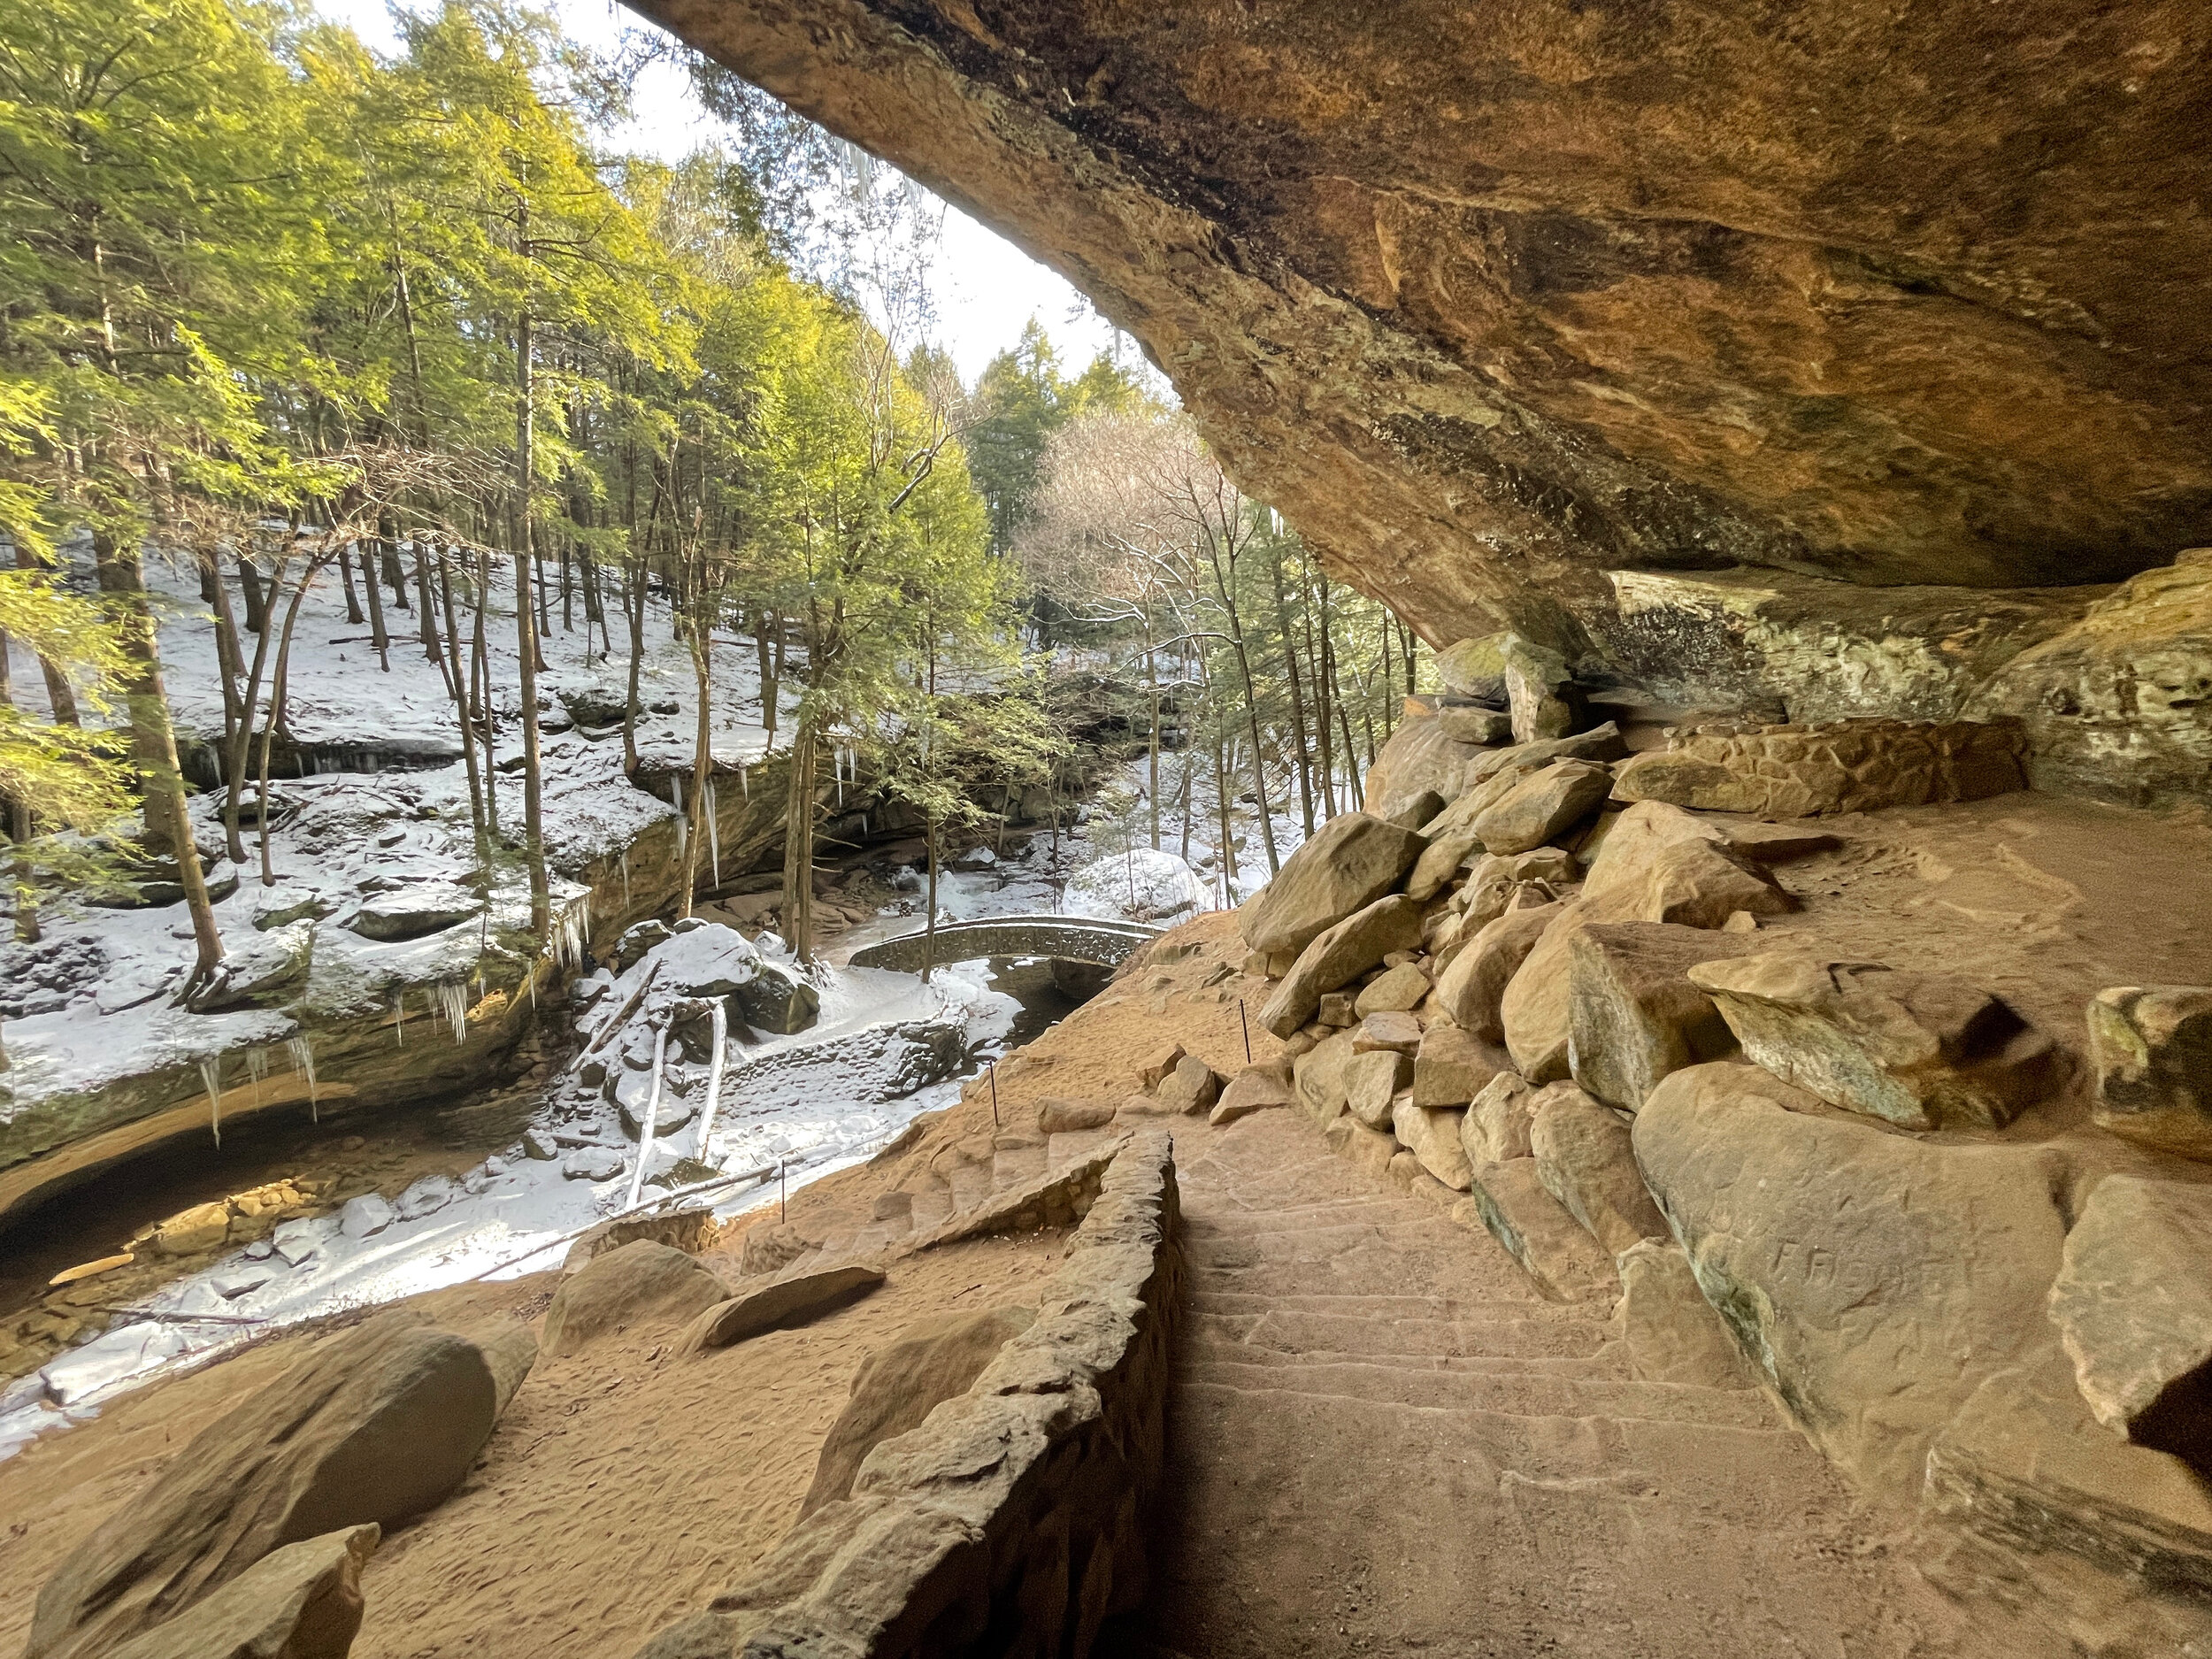 Looking down to the gorge from the overhang cave known as Old Man’s Cave.